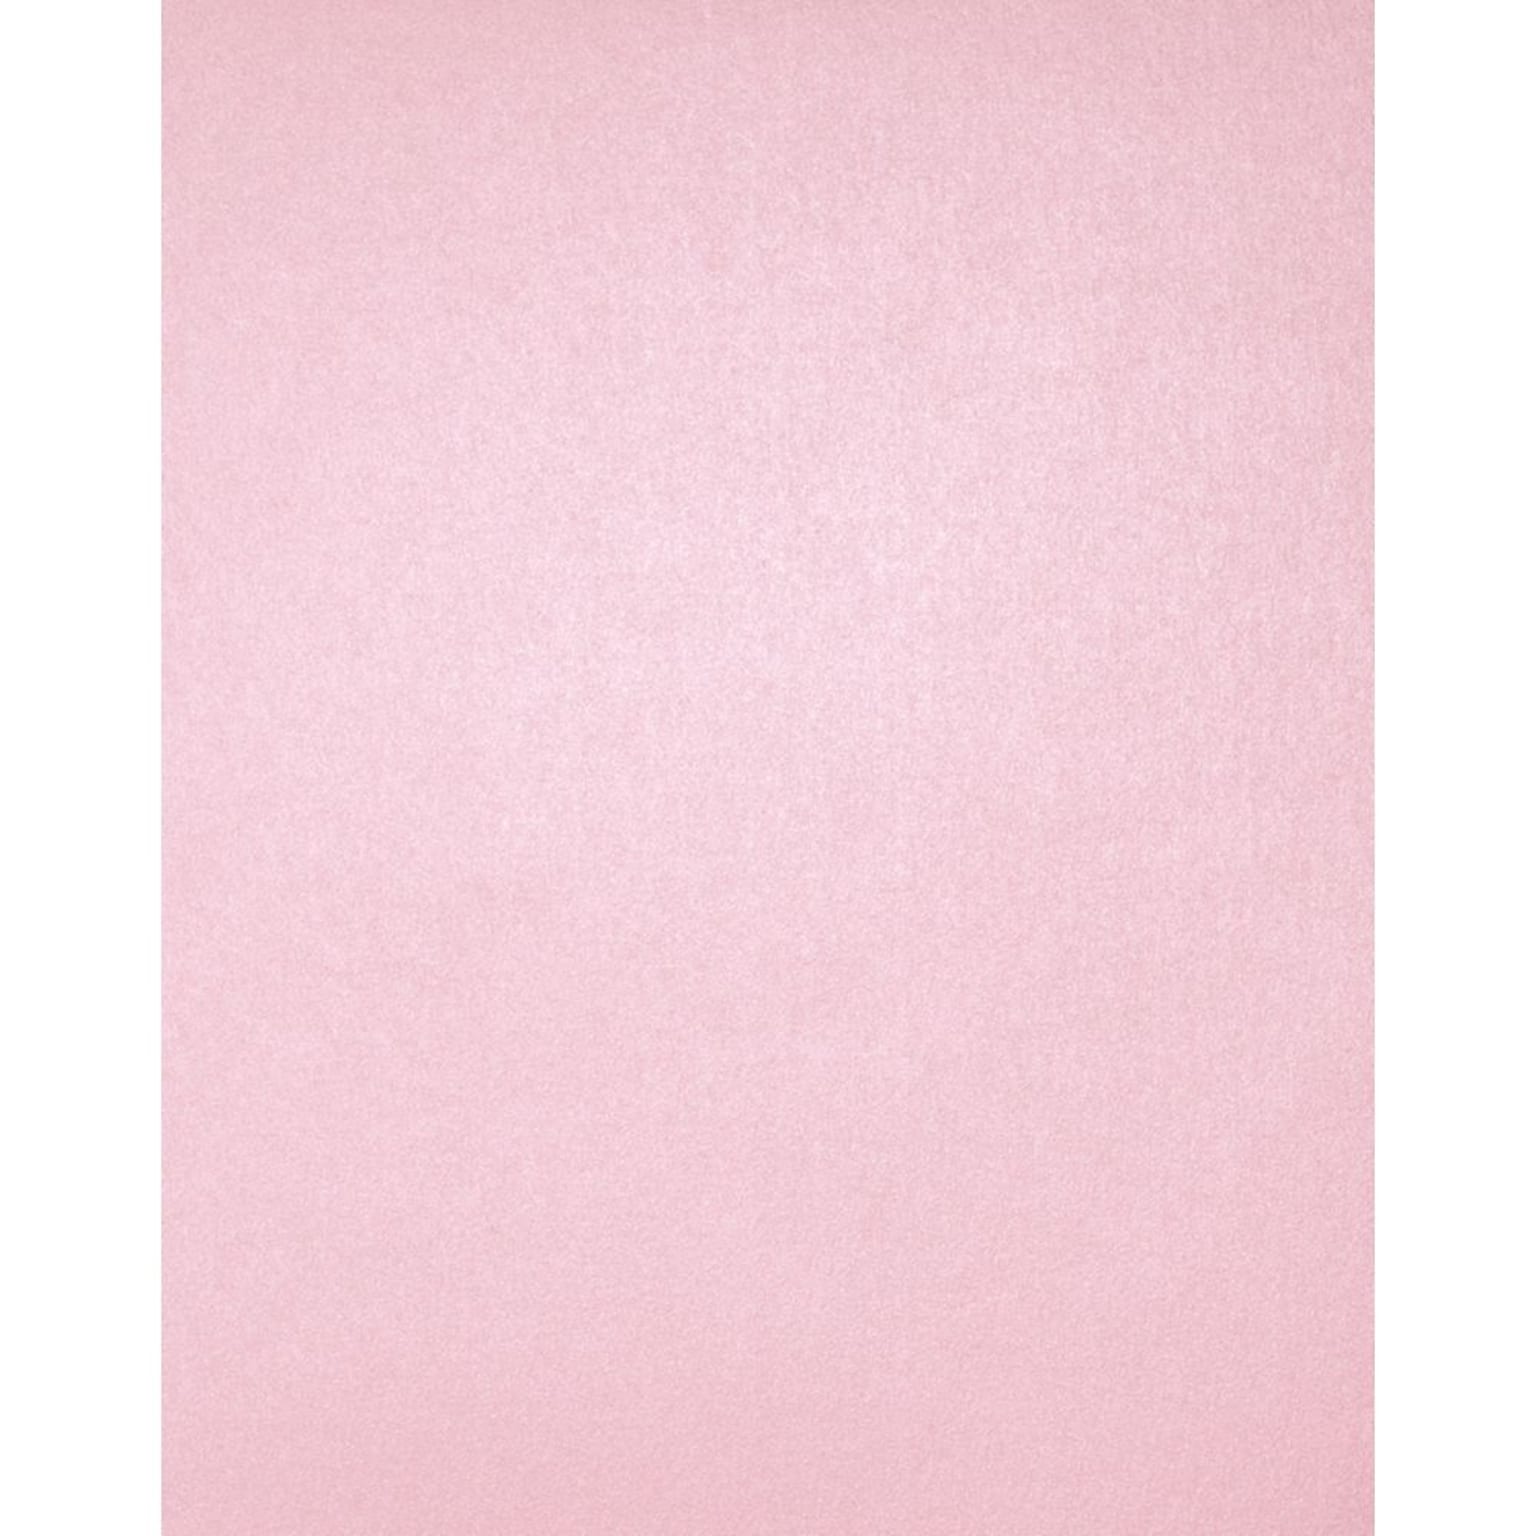 LUX Colored 8.5 x 11 Business Paper, 32 lbs., Rose Quartz Pink Metallic, 50 Sheets/Pack (81211-P-75-50)